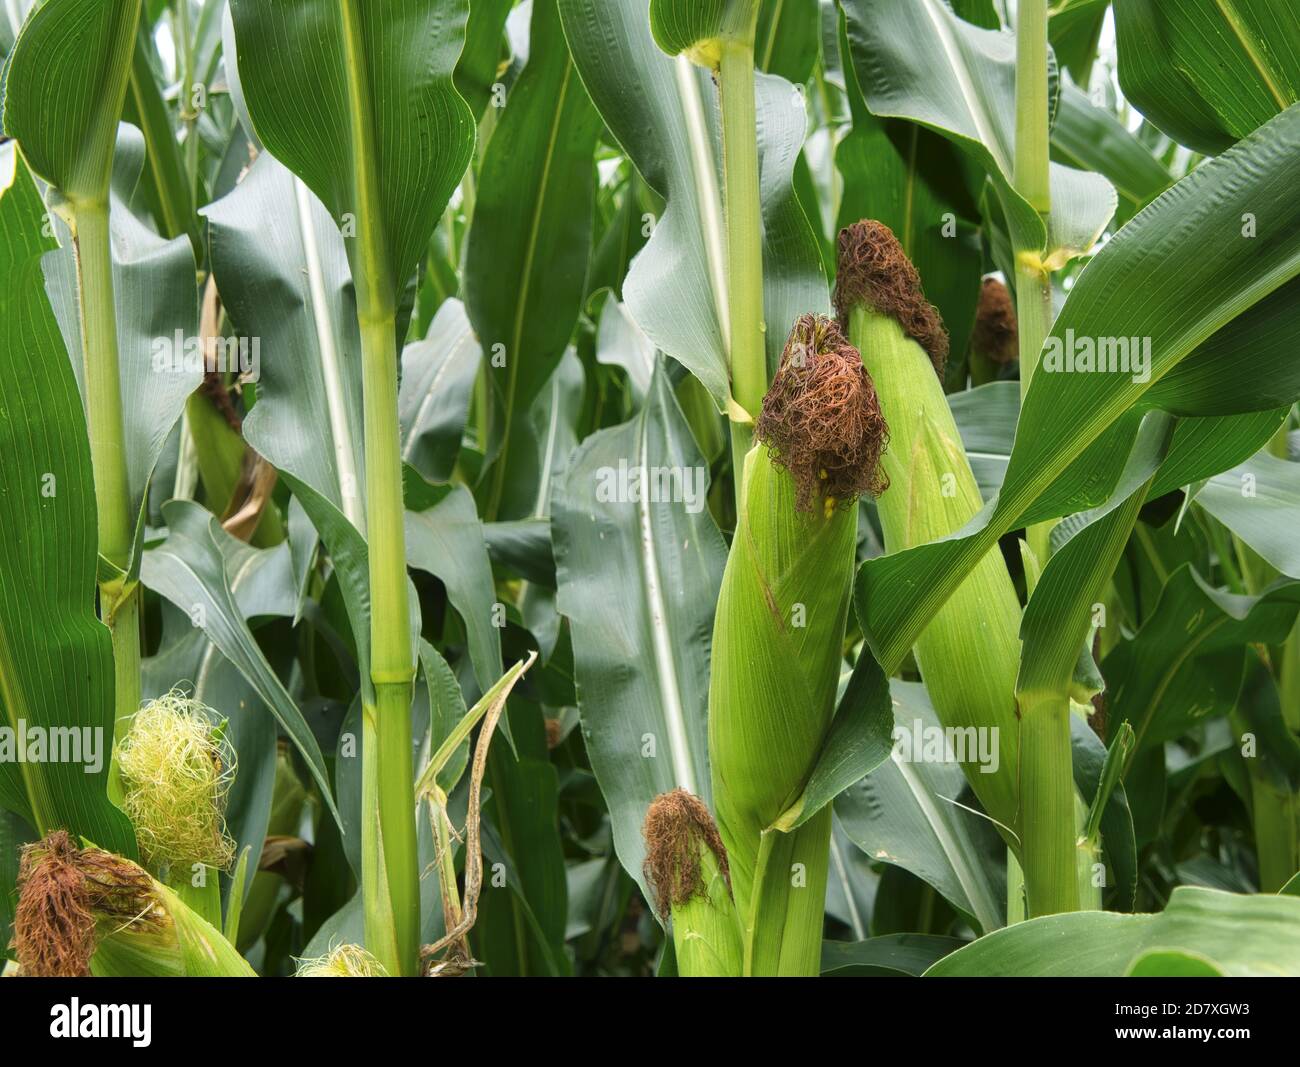 Close-up view of maize ears in the maize field, covered by the protective green bracts and greenish-yellow and brown maize mustache. Individual raindr Stock Photo